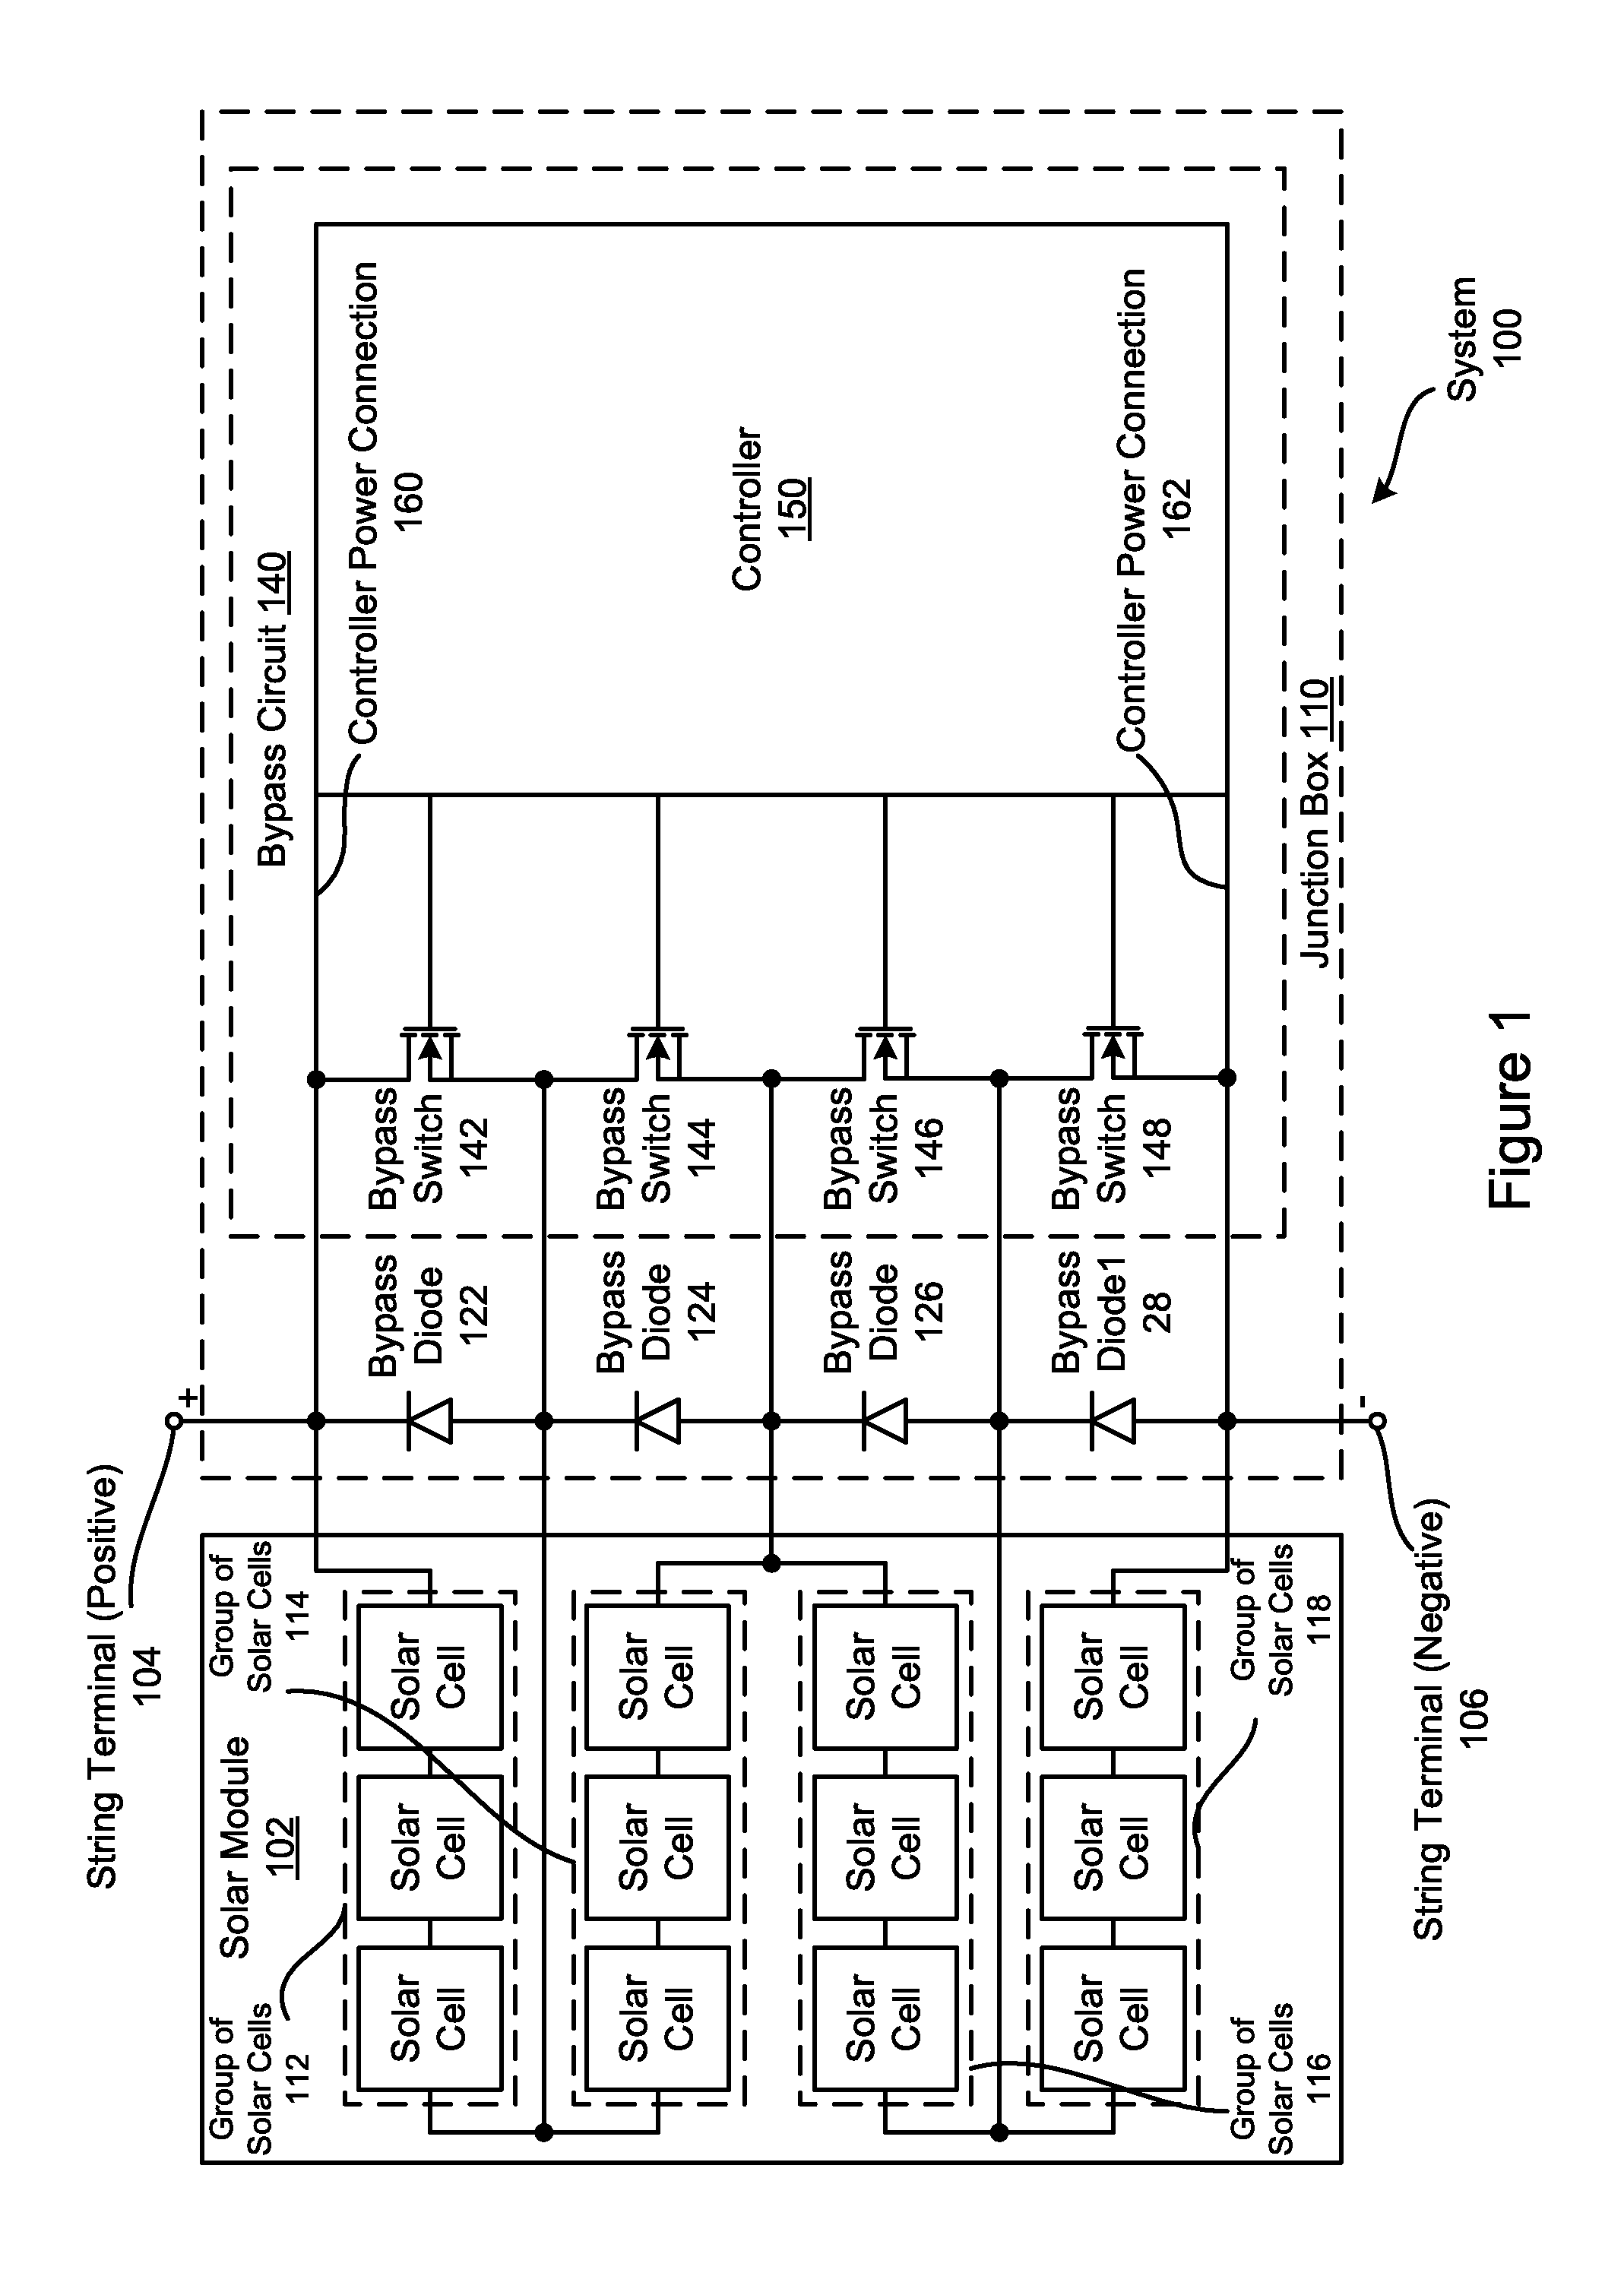 Systems and methods to provide enhanced diode bypass paths